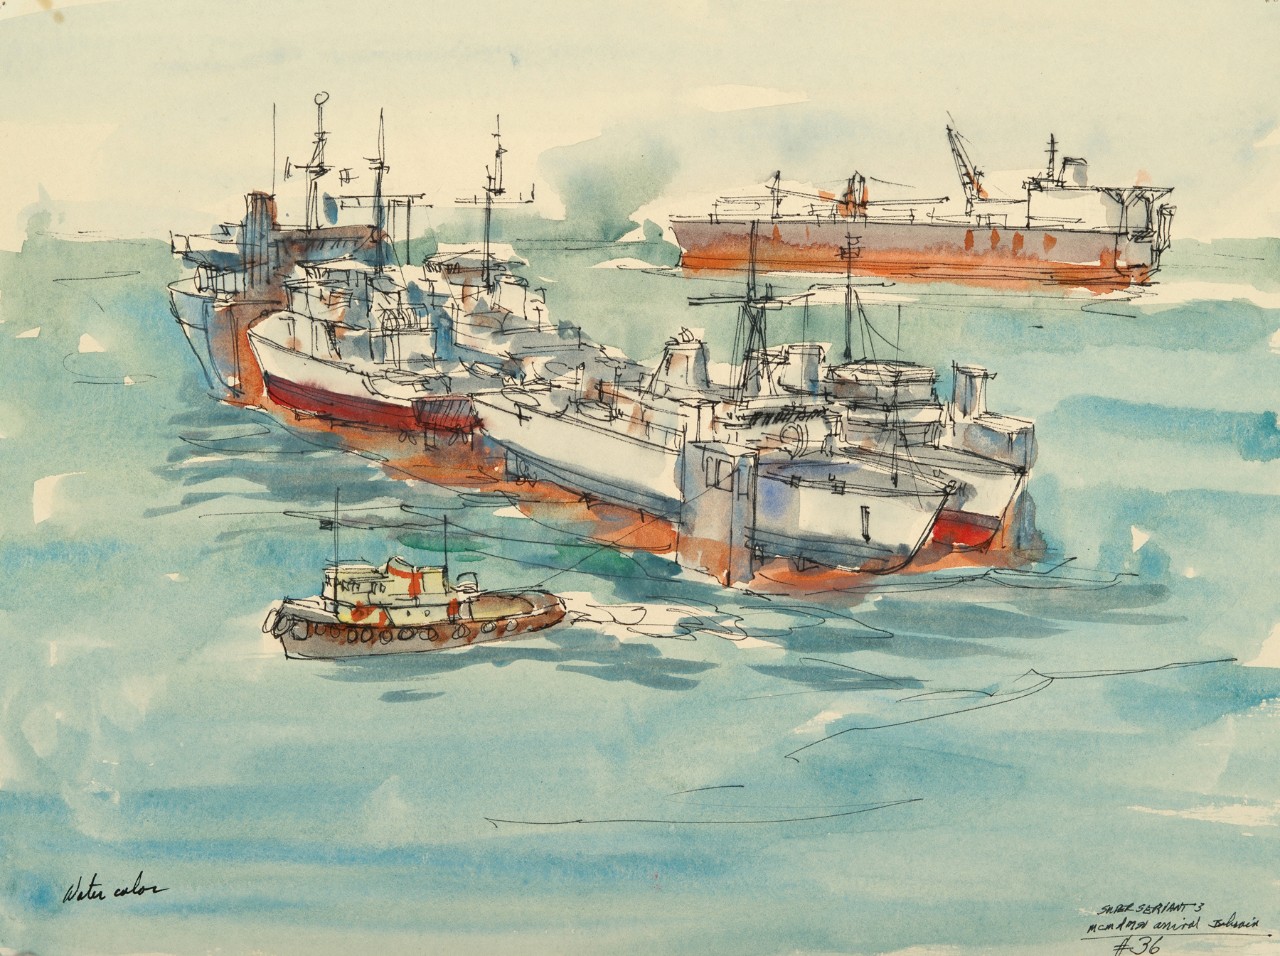 Entering a harbor on a transport ship are four Navy ships with a tug in the foreground